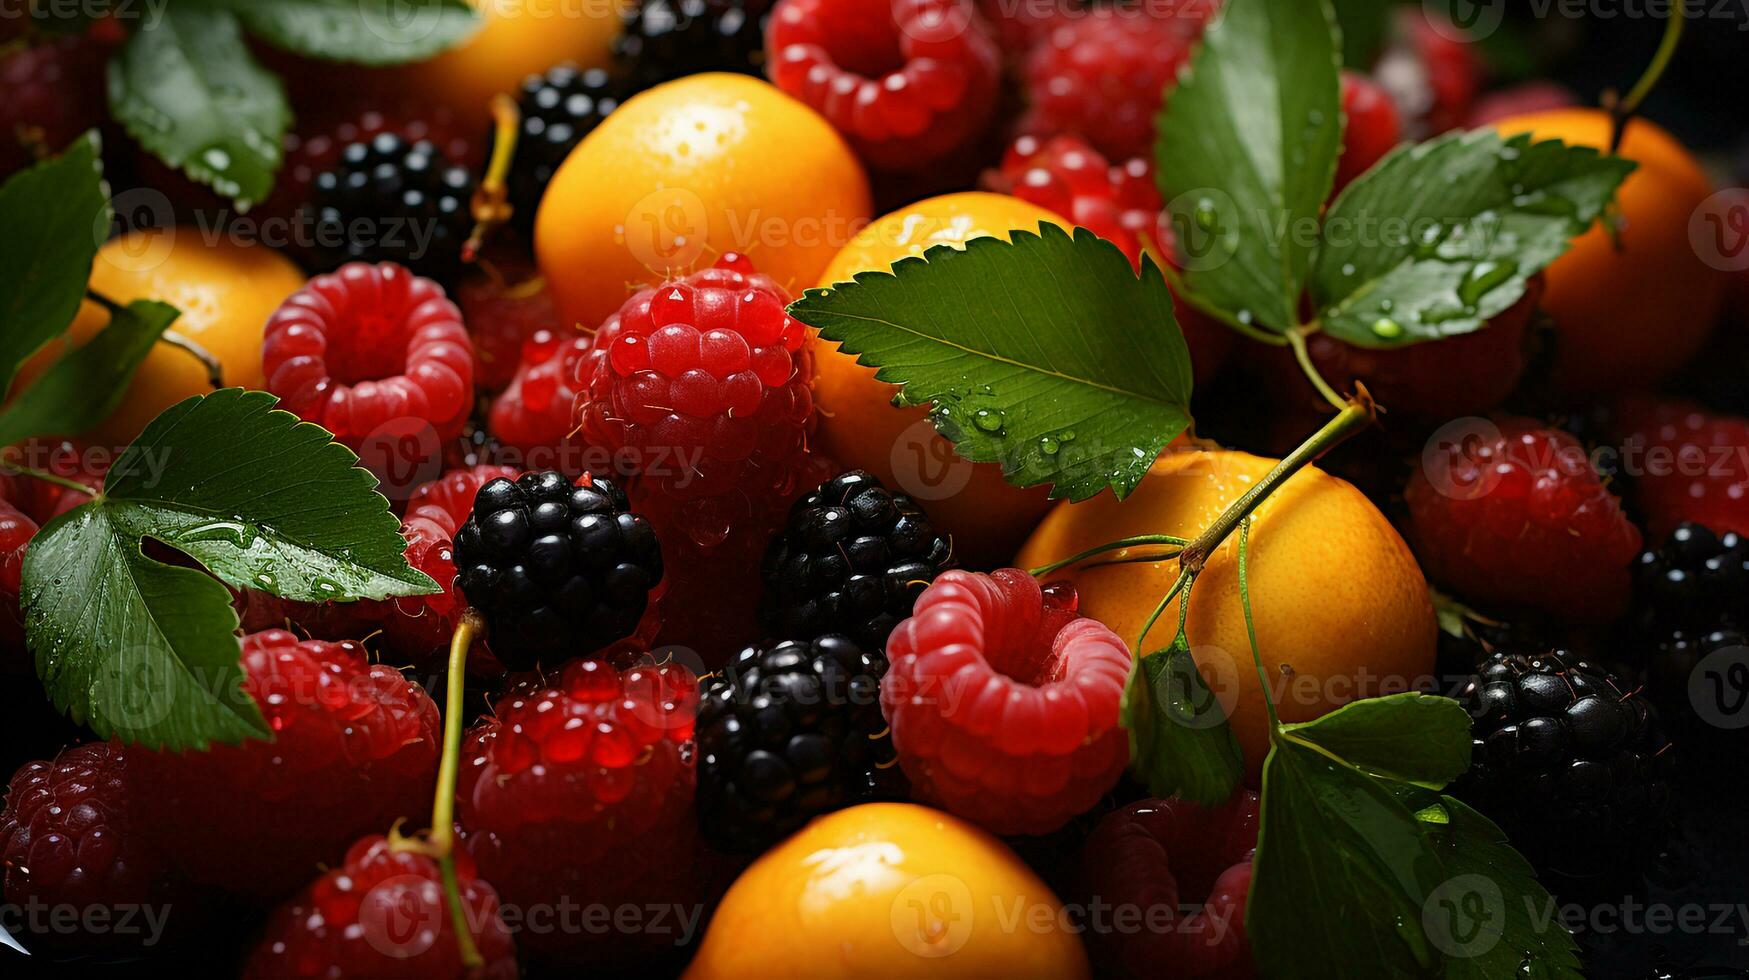 Background of various kinds of fresh fruit photo